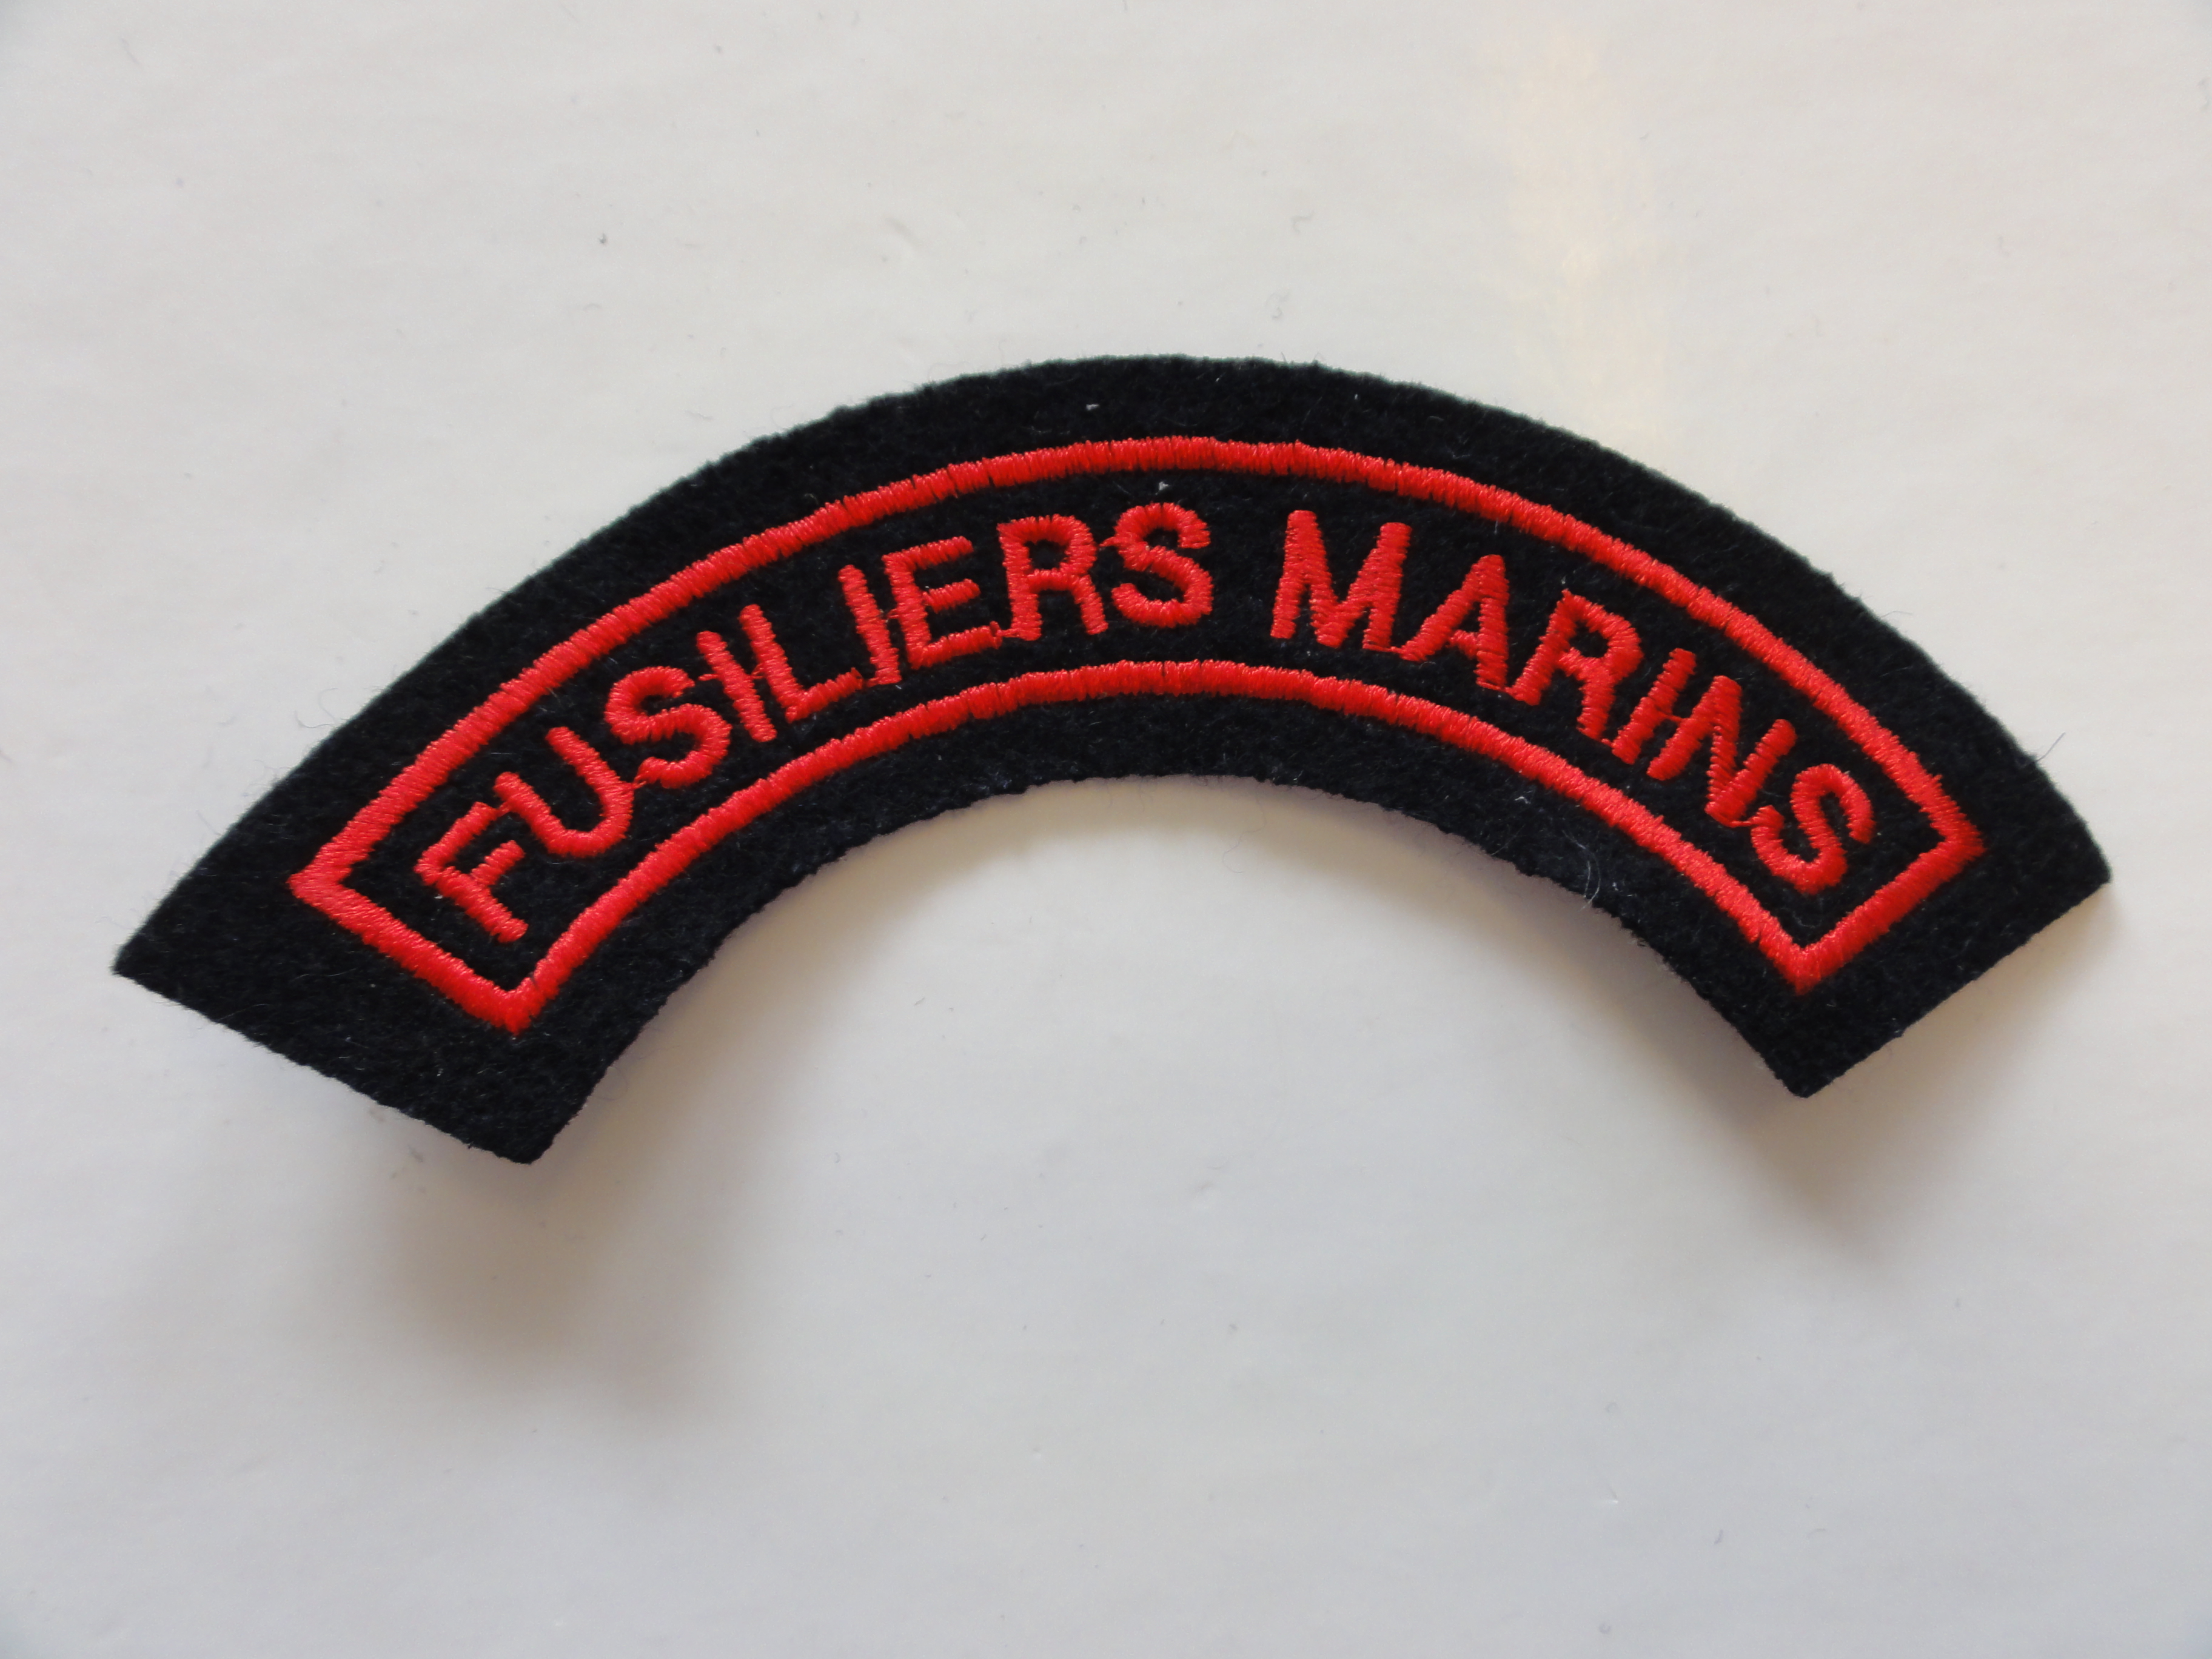 Fusiliers marins